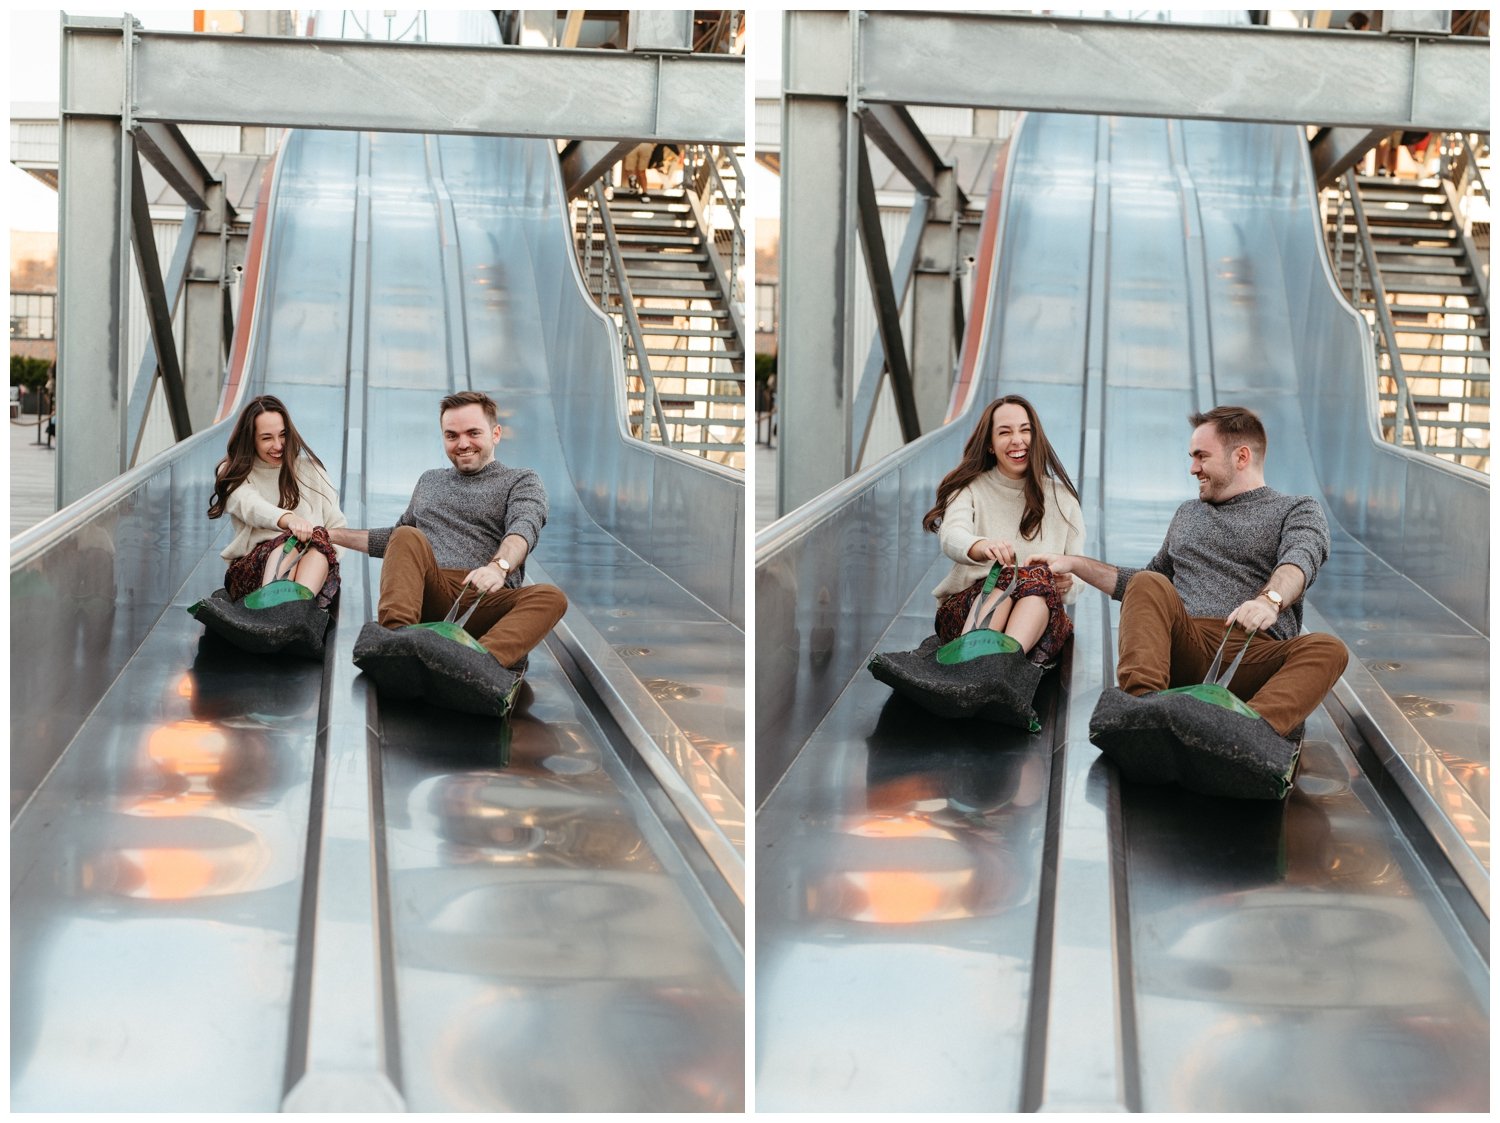 The couple holds hands as they ride a slide during Atlanta engagement photos